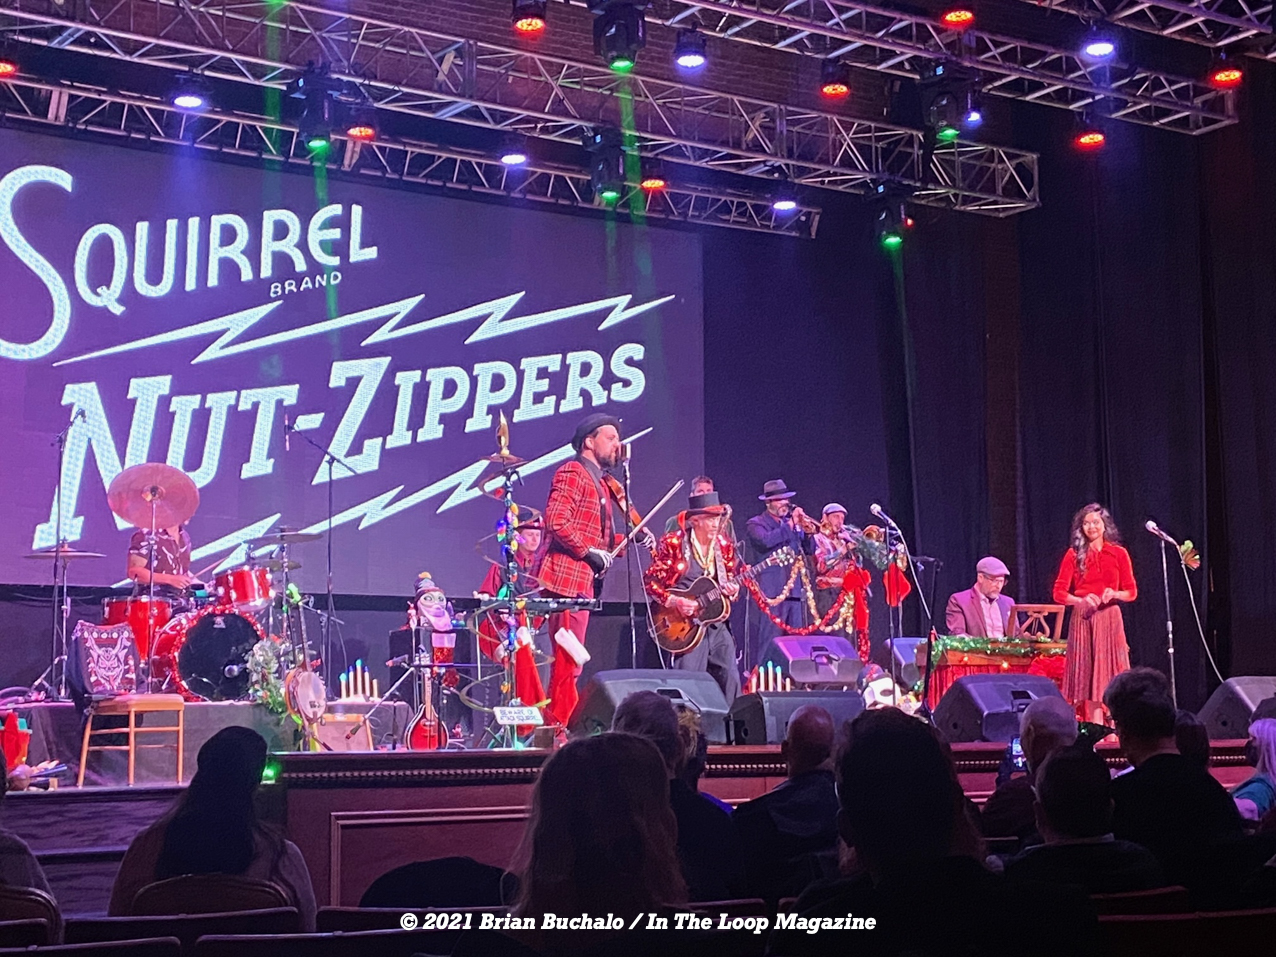 Holiday Celebrations Come To The Arcada Theatre As The Squirrel Nut Zippers Bring The Holiday Caravan